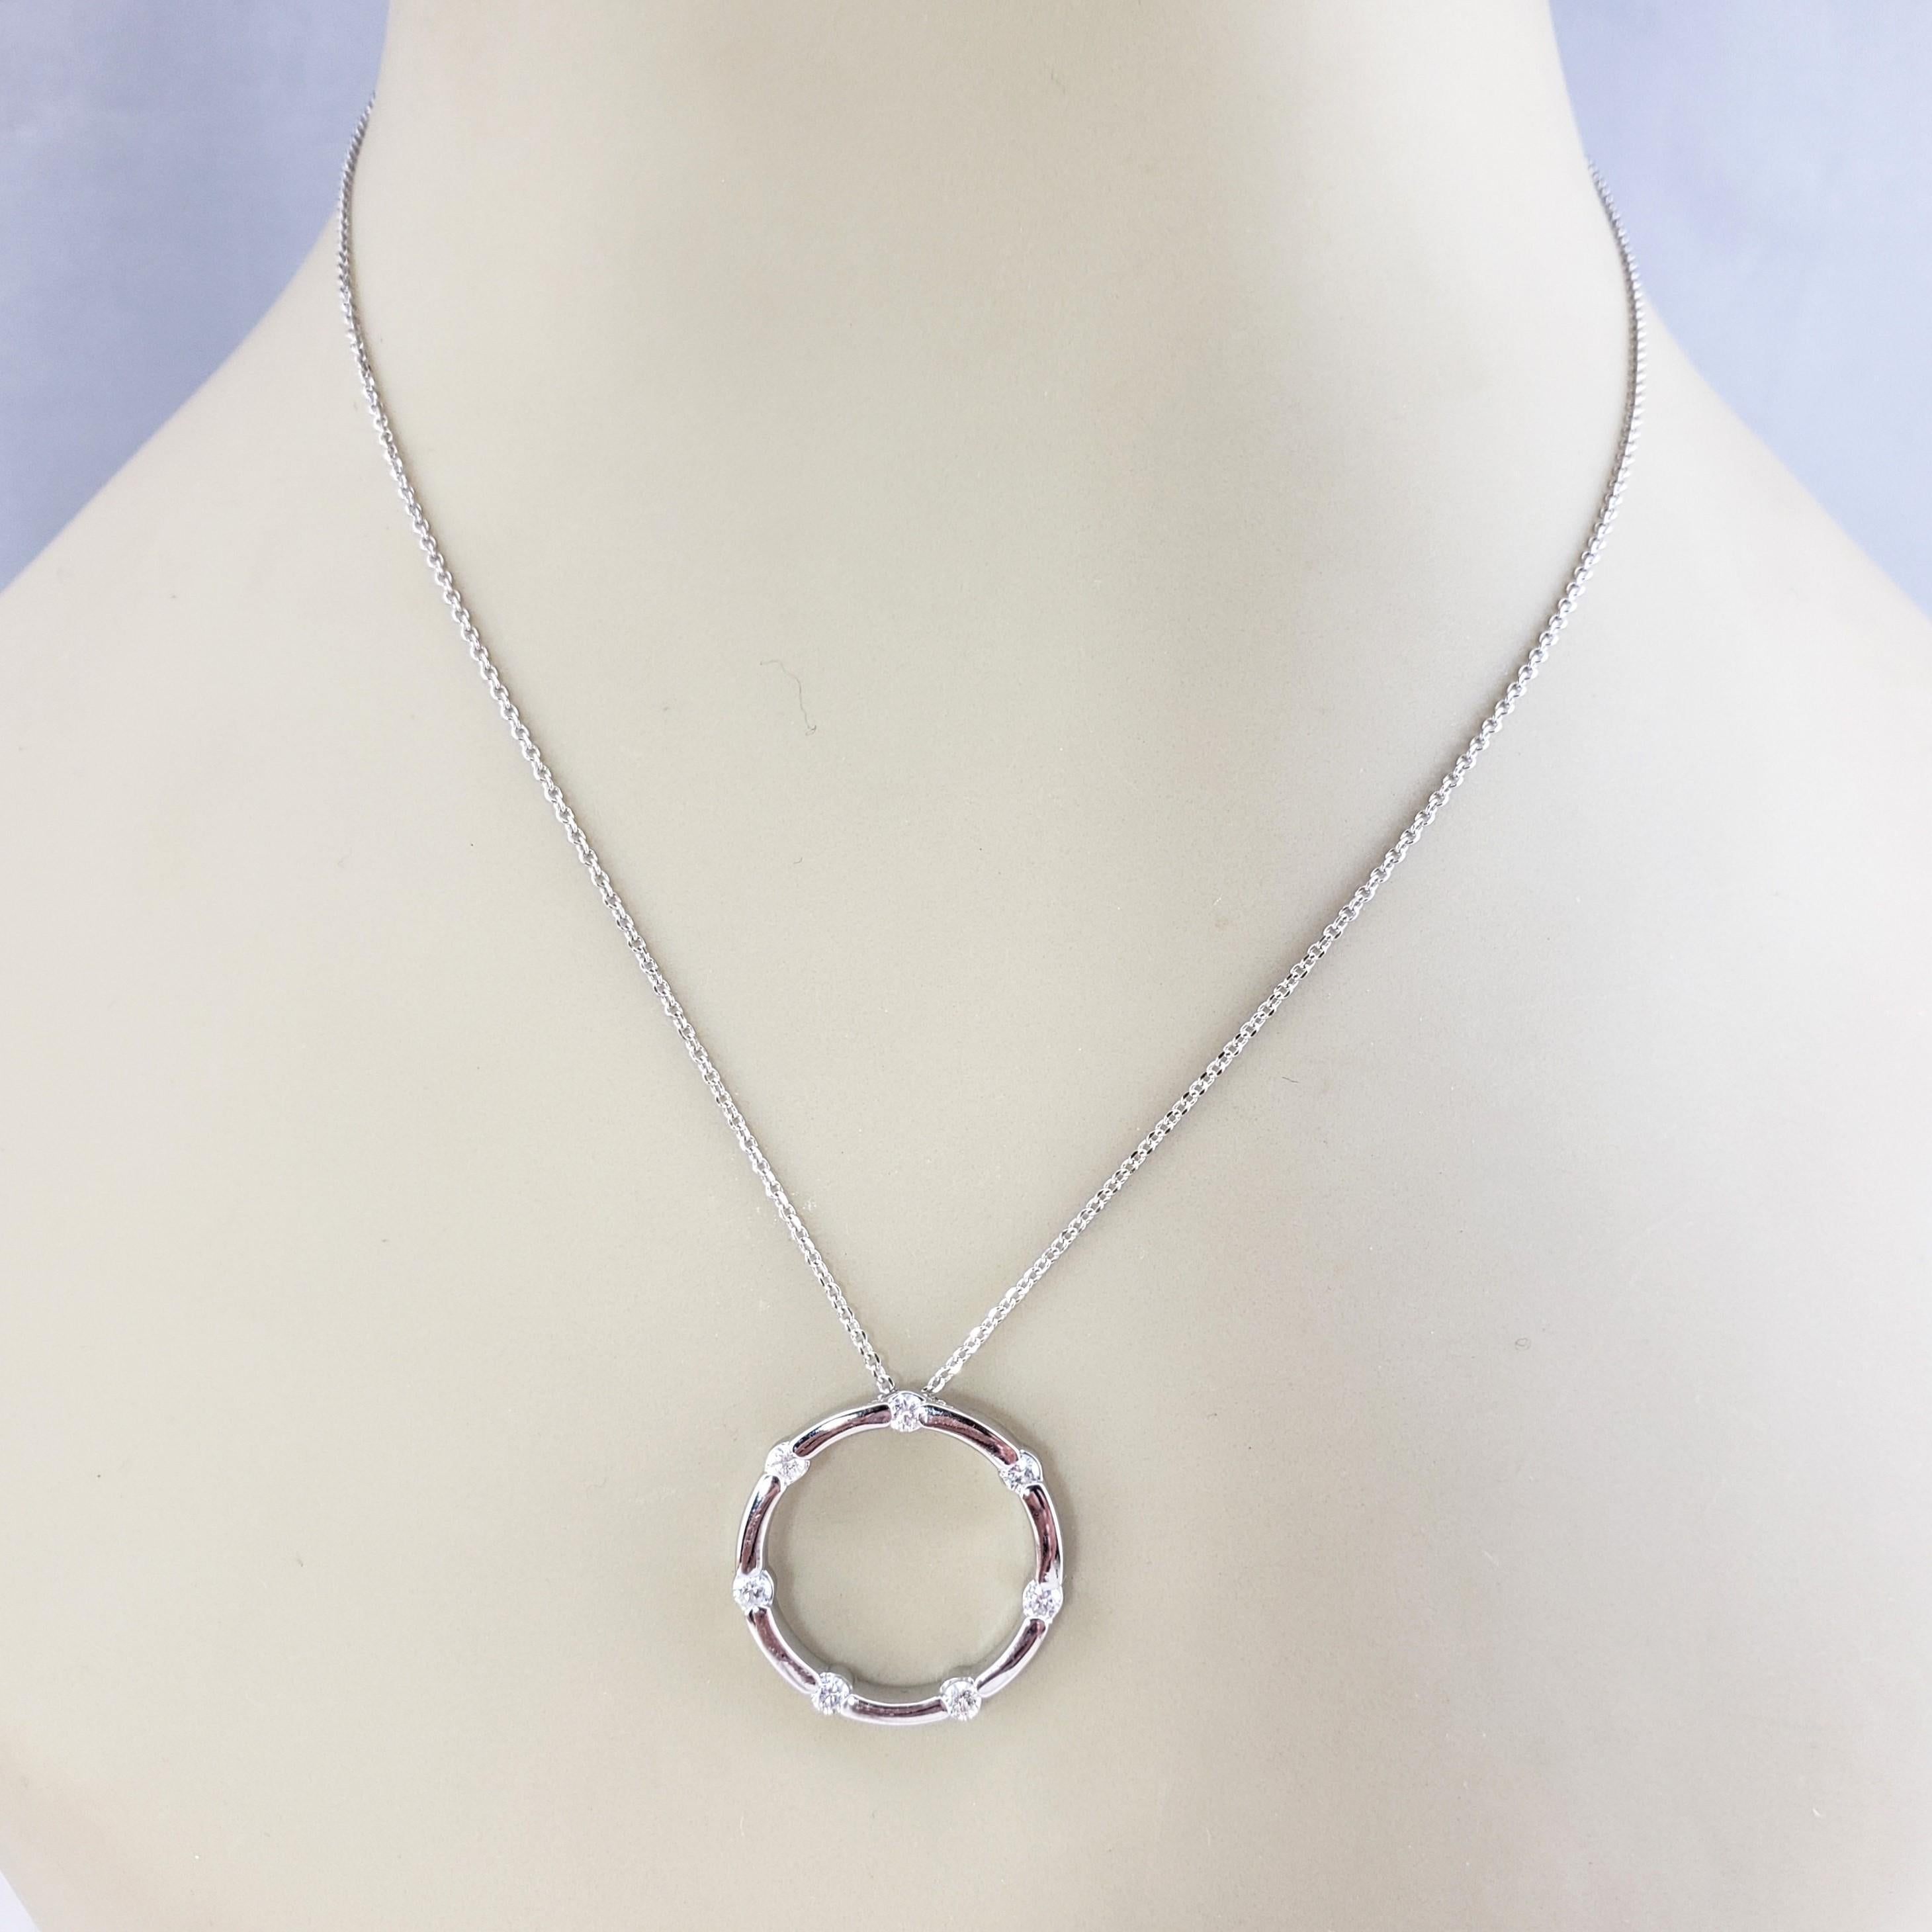 14 Karat White Gold and Diamond Circle Pendant Necklace #15493 For Sale 2